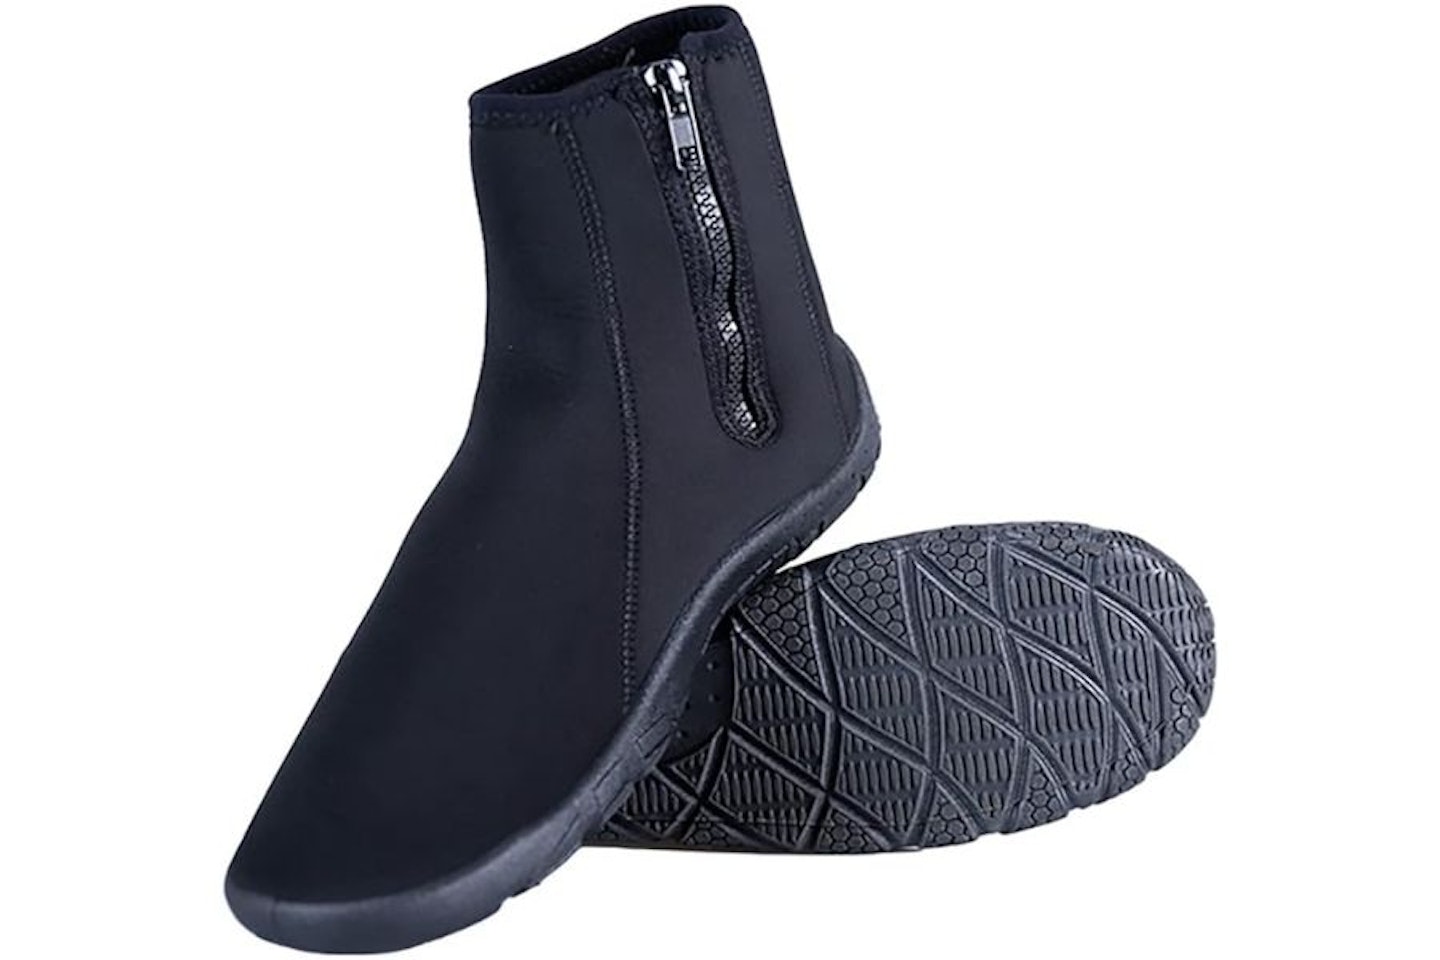 Two Bare Feet Adults Unisex Zipped Wetsuit Boots